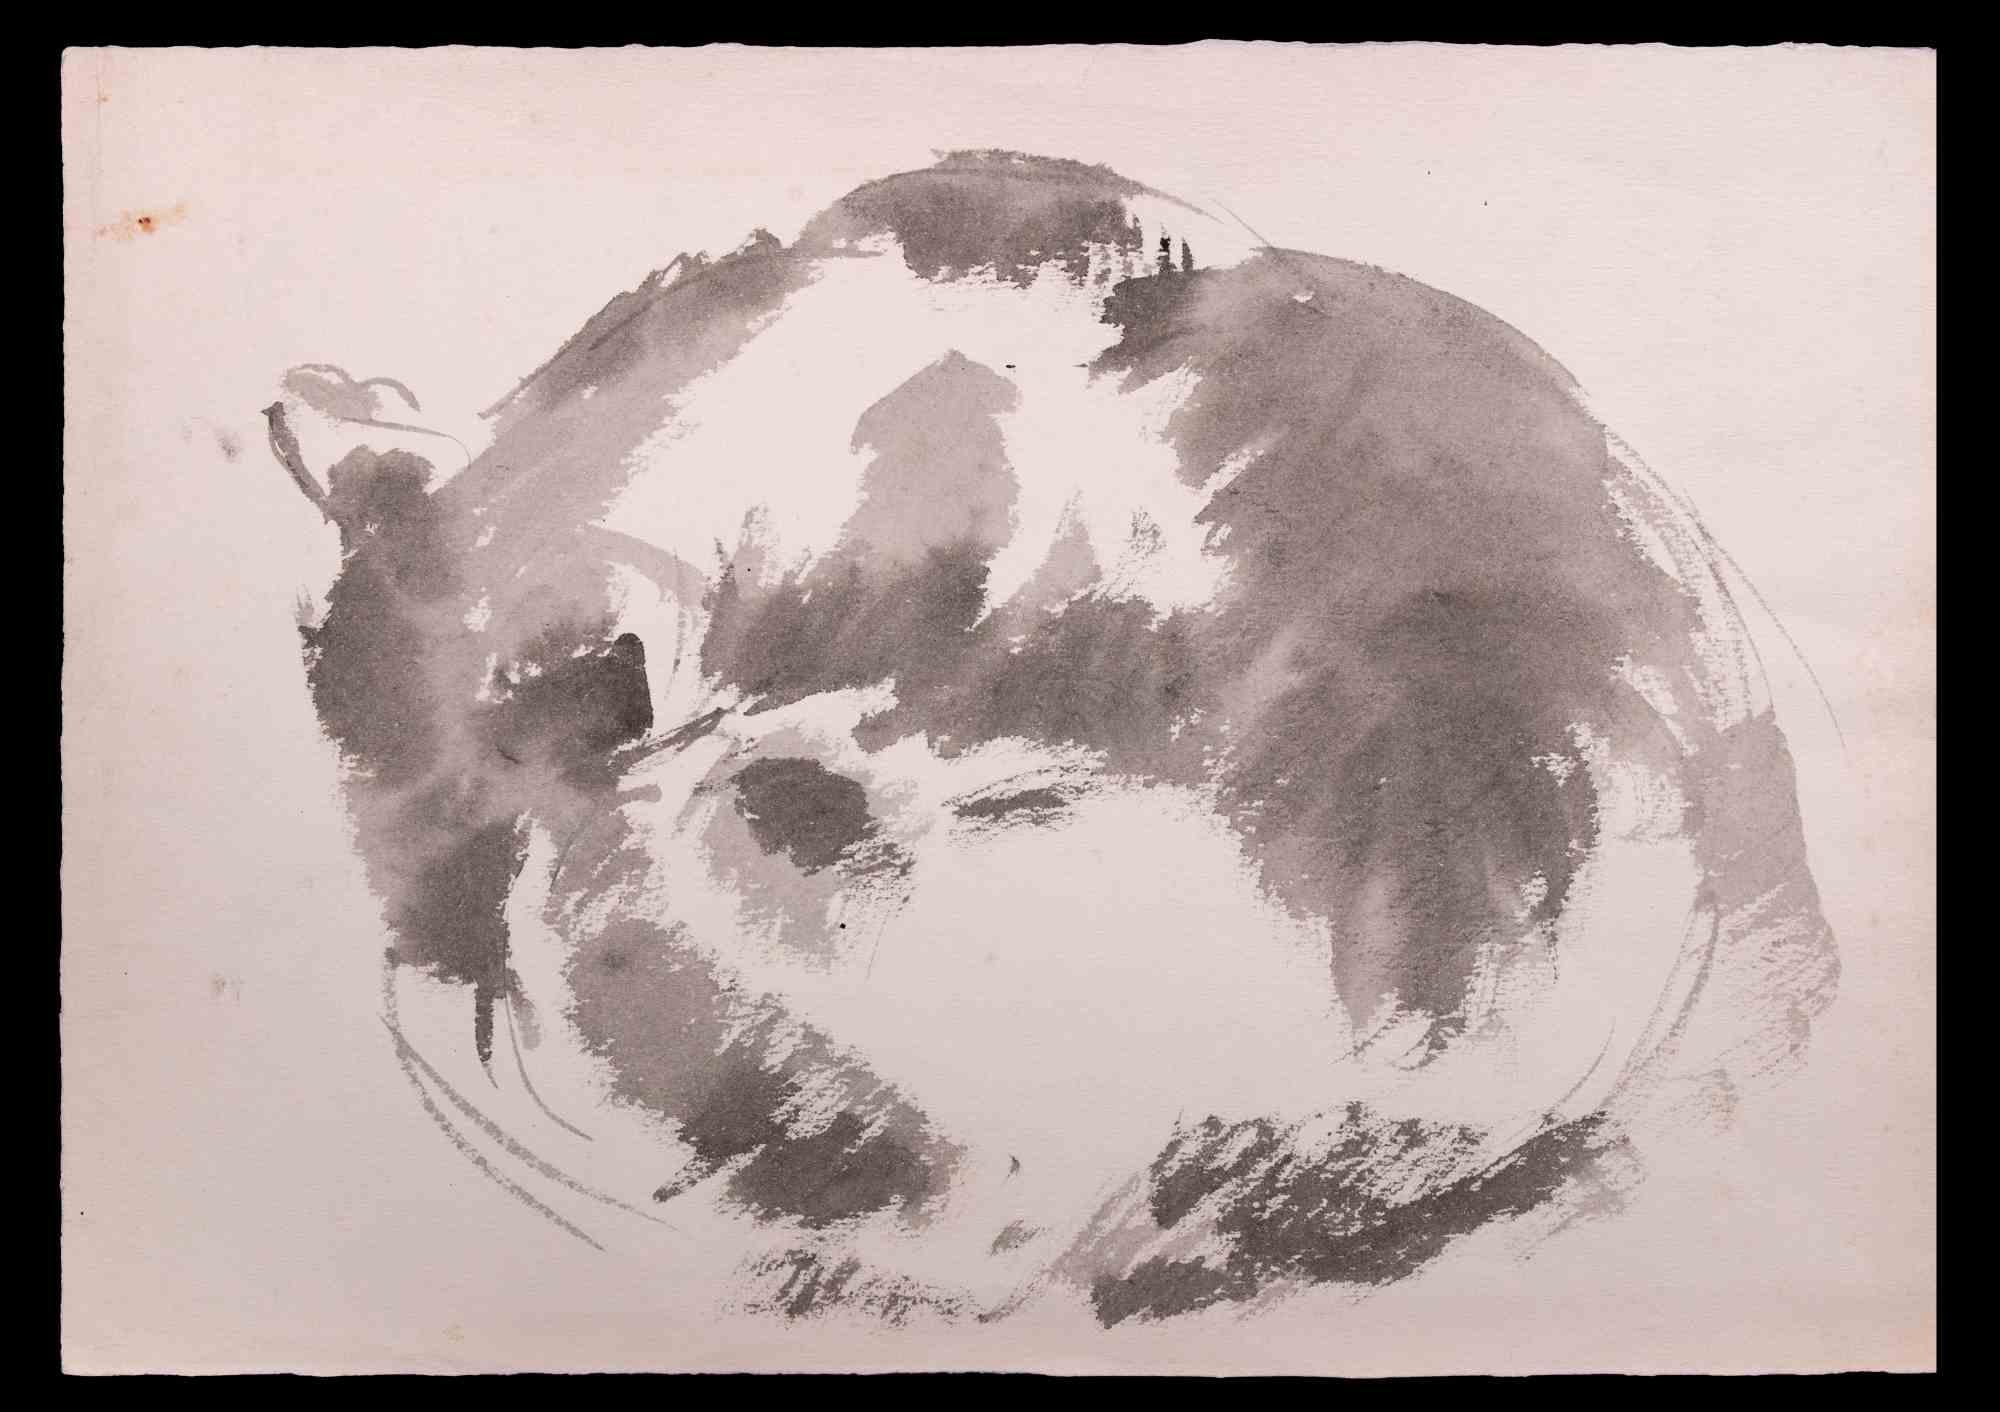 Sleeping Cat is a carbon pencil and watercolor drawing realized by Giselle Halff (1899-1971).

Good conditions.

Giselle Halff (1899-1971) born in Hanoi, student of R.X. Prinet, R. Ménard, L. Simon, B. Boutet de Monvel. Animal painter and